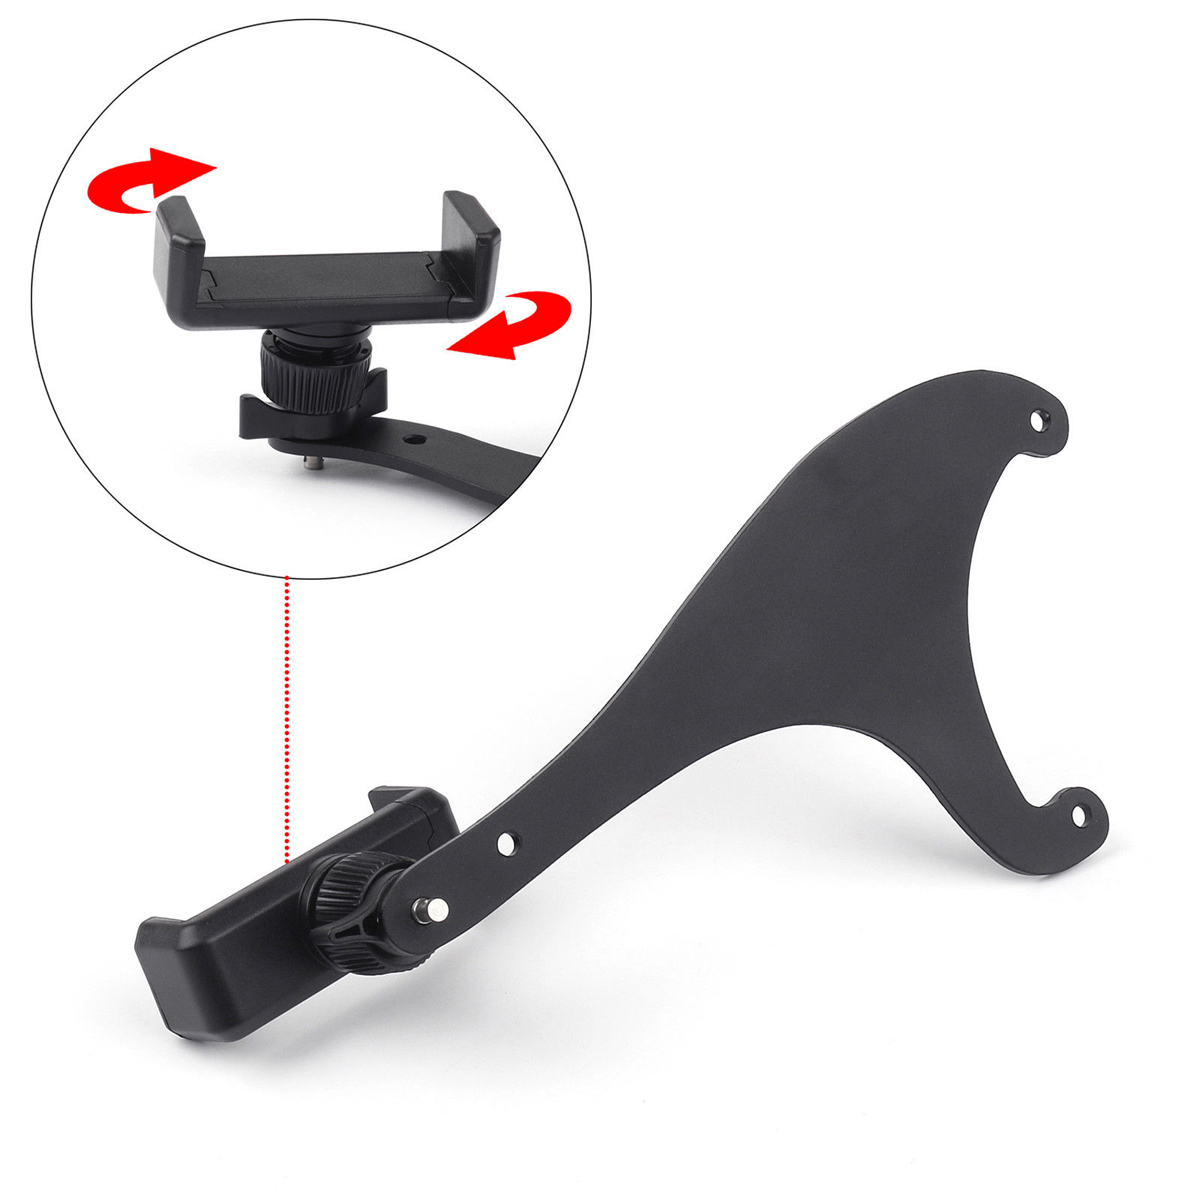 Bakeey-360deg-Rotation-Car-Phone-Mount-Cradle-Holder-Stand-for-Mini-Cooper-R60R61-F54F55F56-R55R56-F-1633190-4